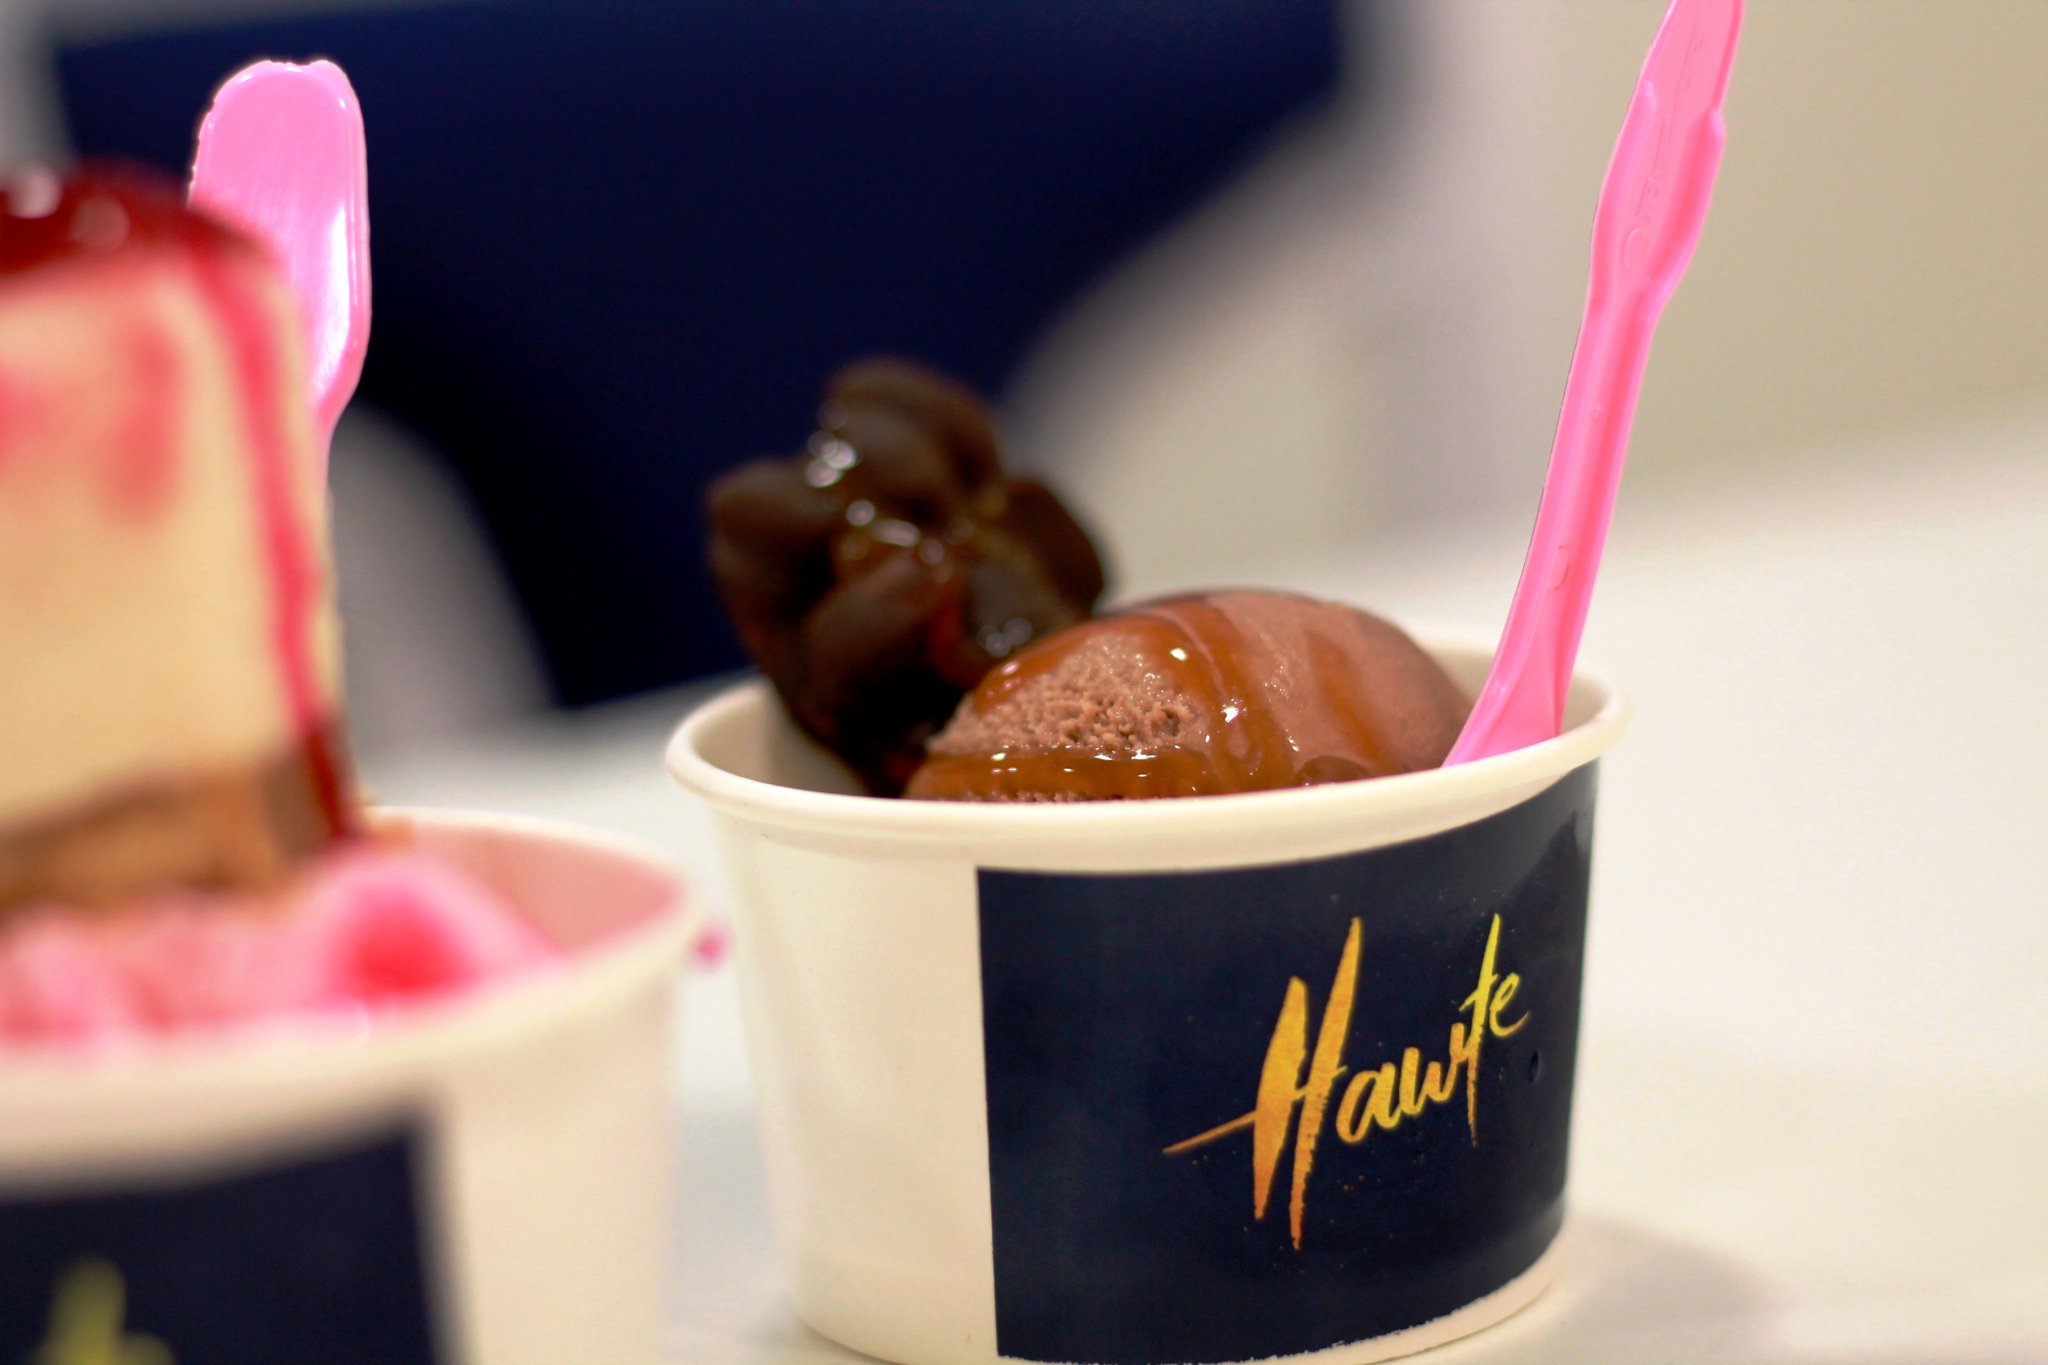 Alcohol-infused ice cream creator Hawte is a cool franchise to own